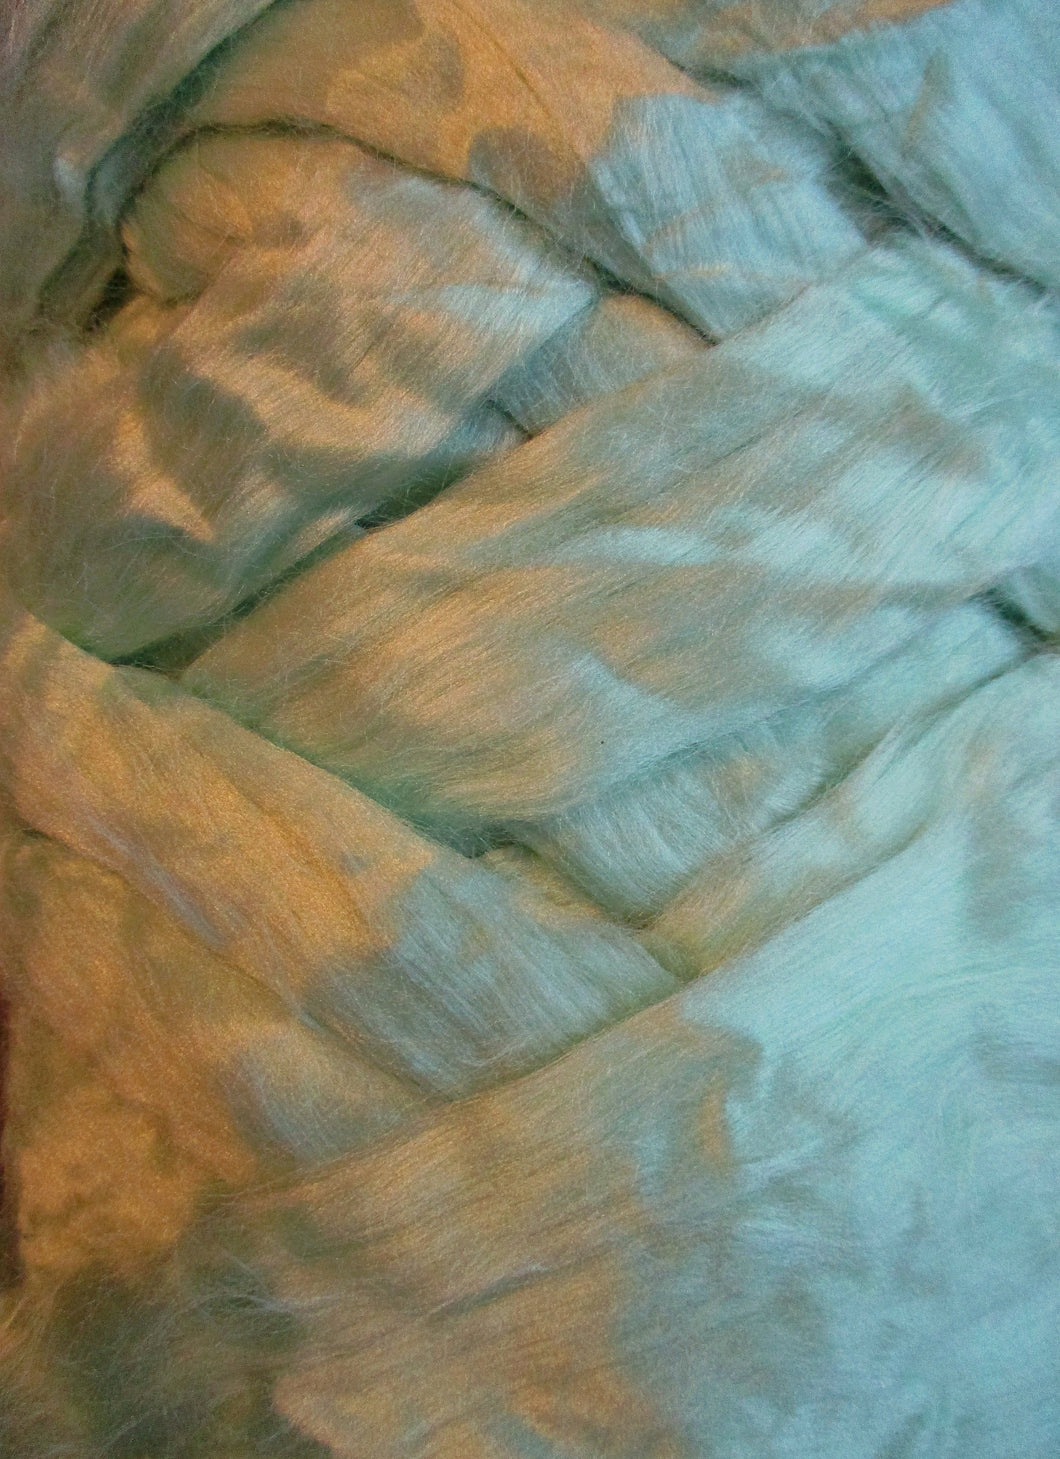 Celery SUPERSOFT & SILKY Organic Viscose Fiber Bamboo DHG Super Fast Shipping!